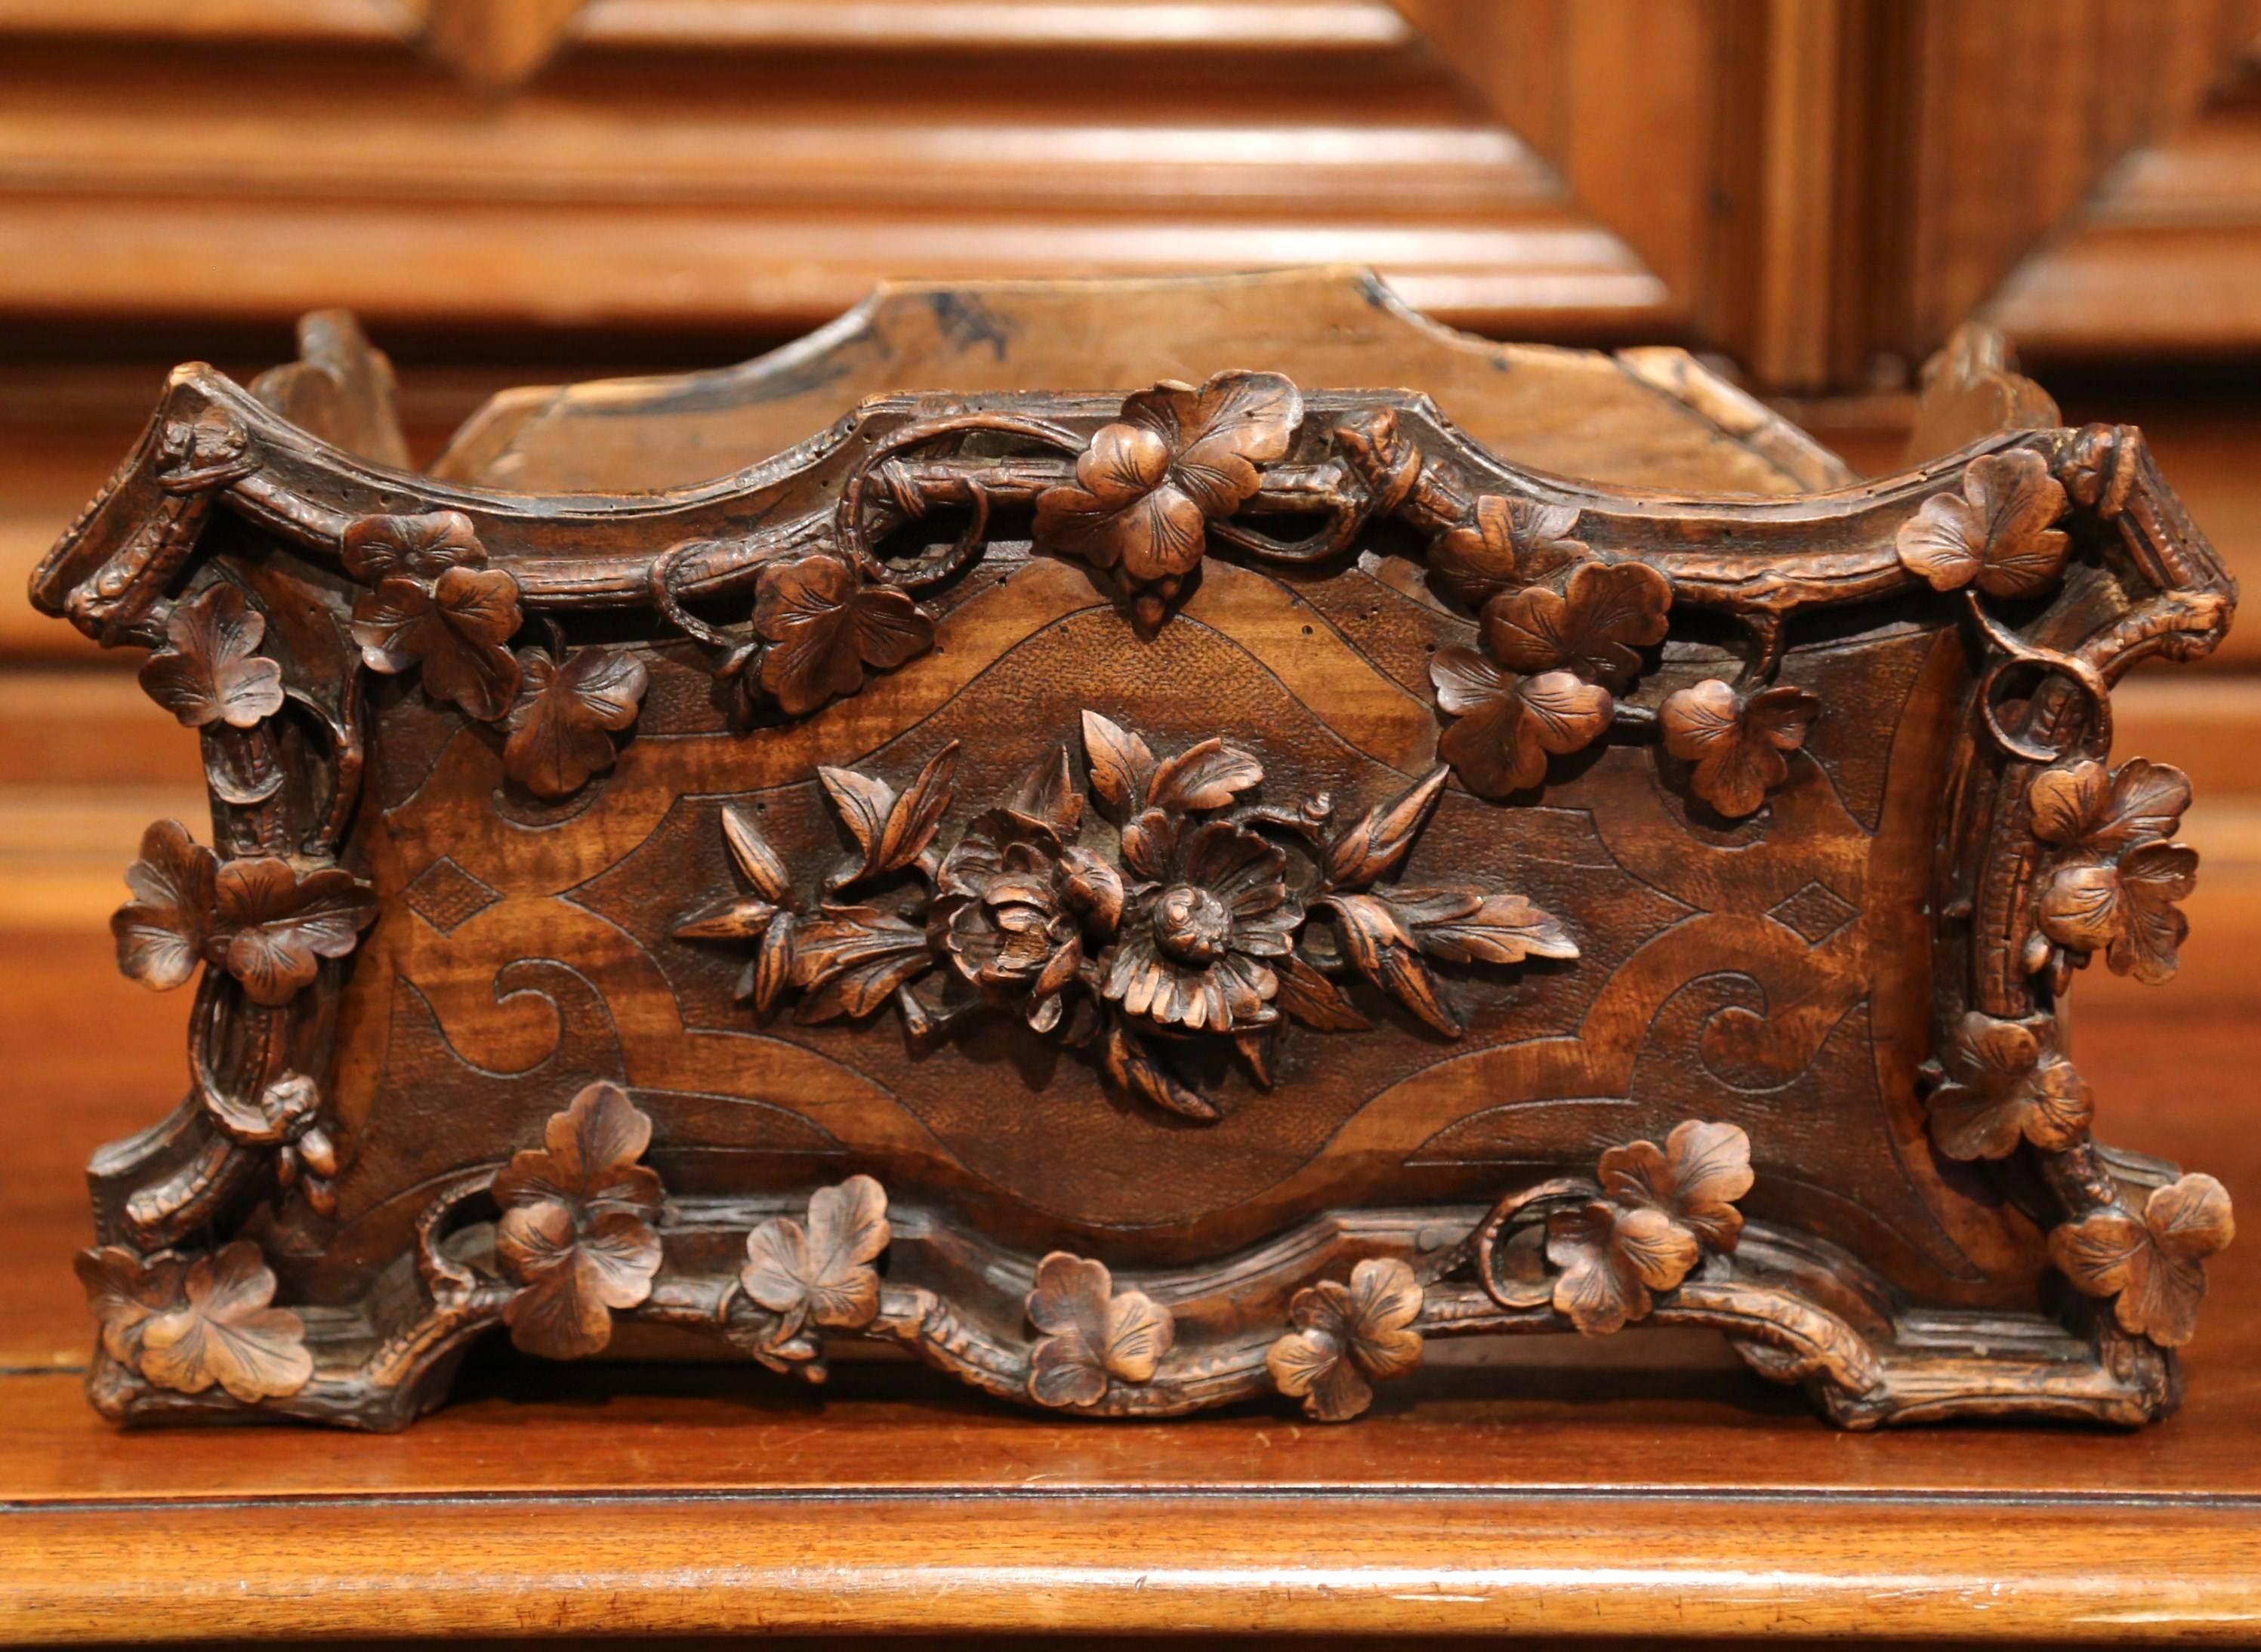 This beautiful antique black forest jardiniere was crafted in France, circa 1880. The rectangular fruit wood planter features hand carved flowers, acorns, branches and leaves on all four sides. The jardiniere also has detailed marquetry design with